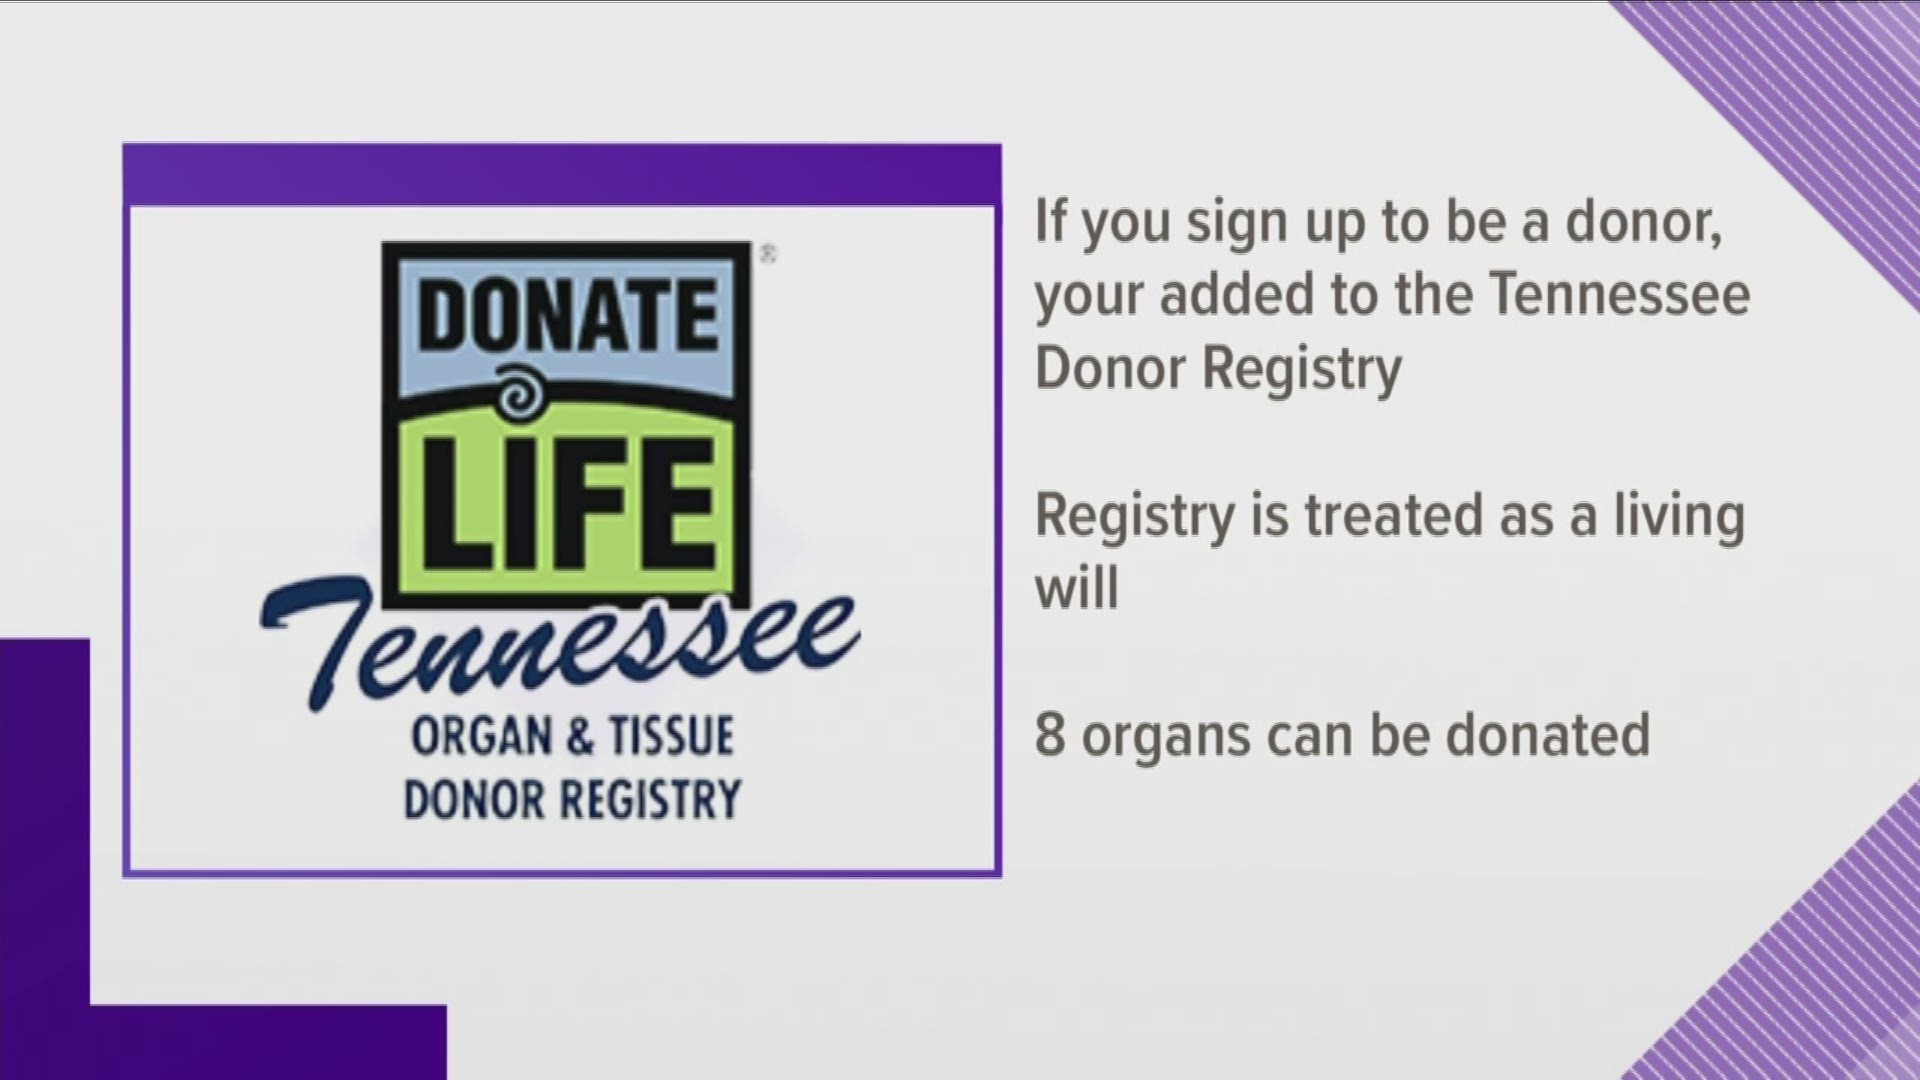 There are a lot of myths and questions surrounding being an organ donor.